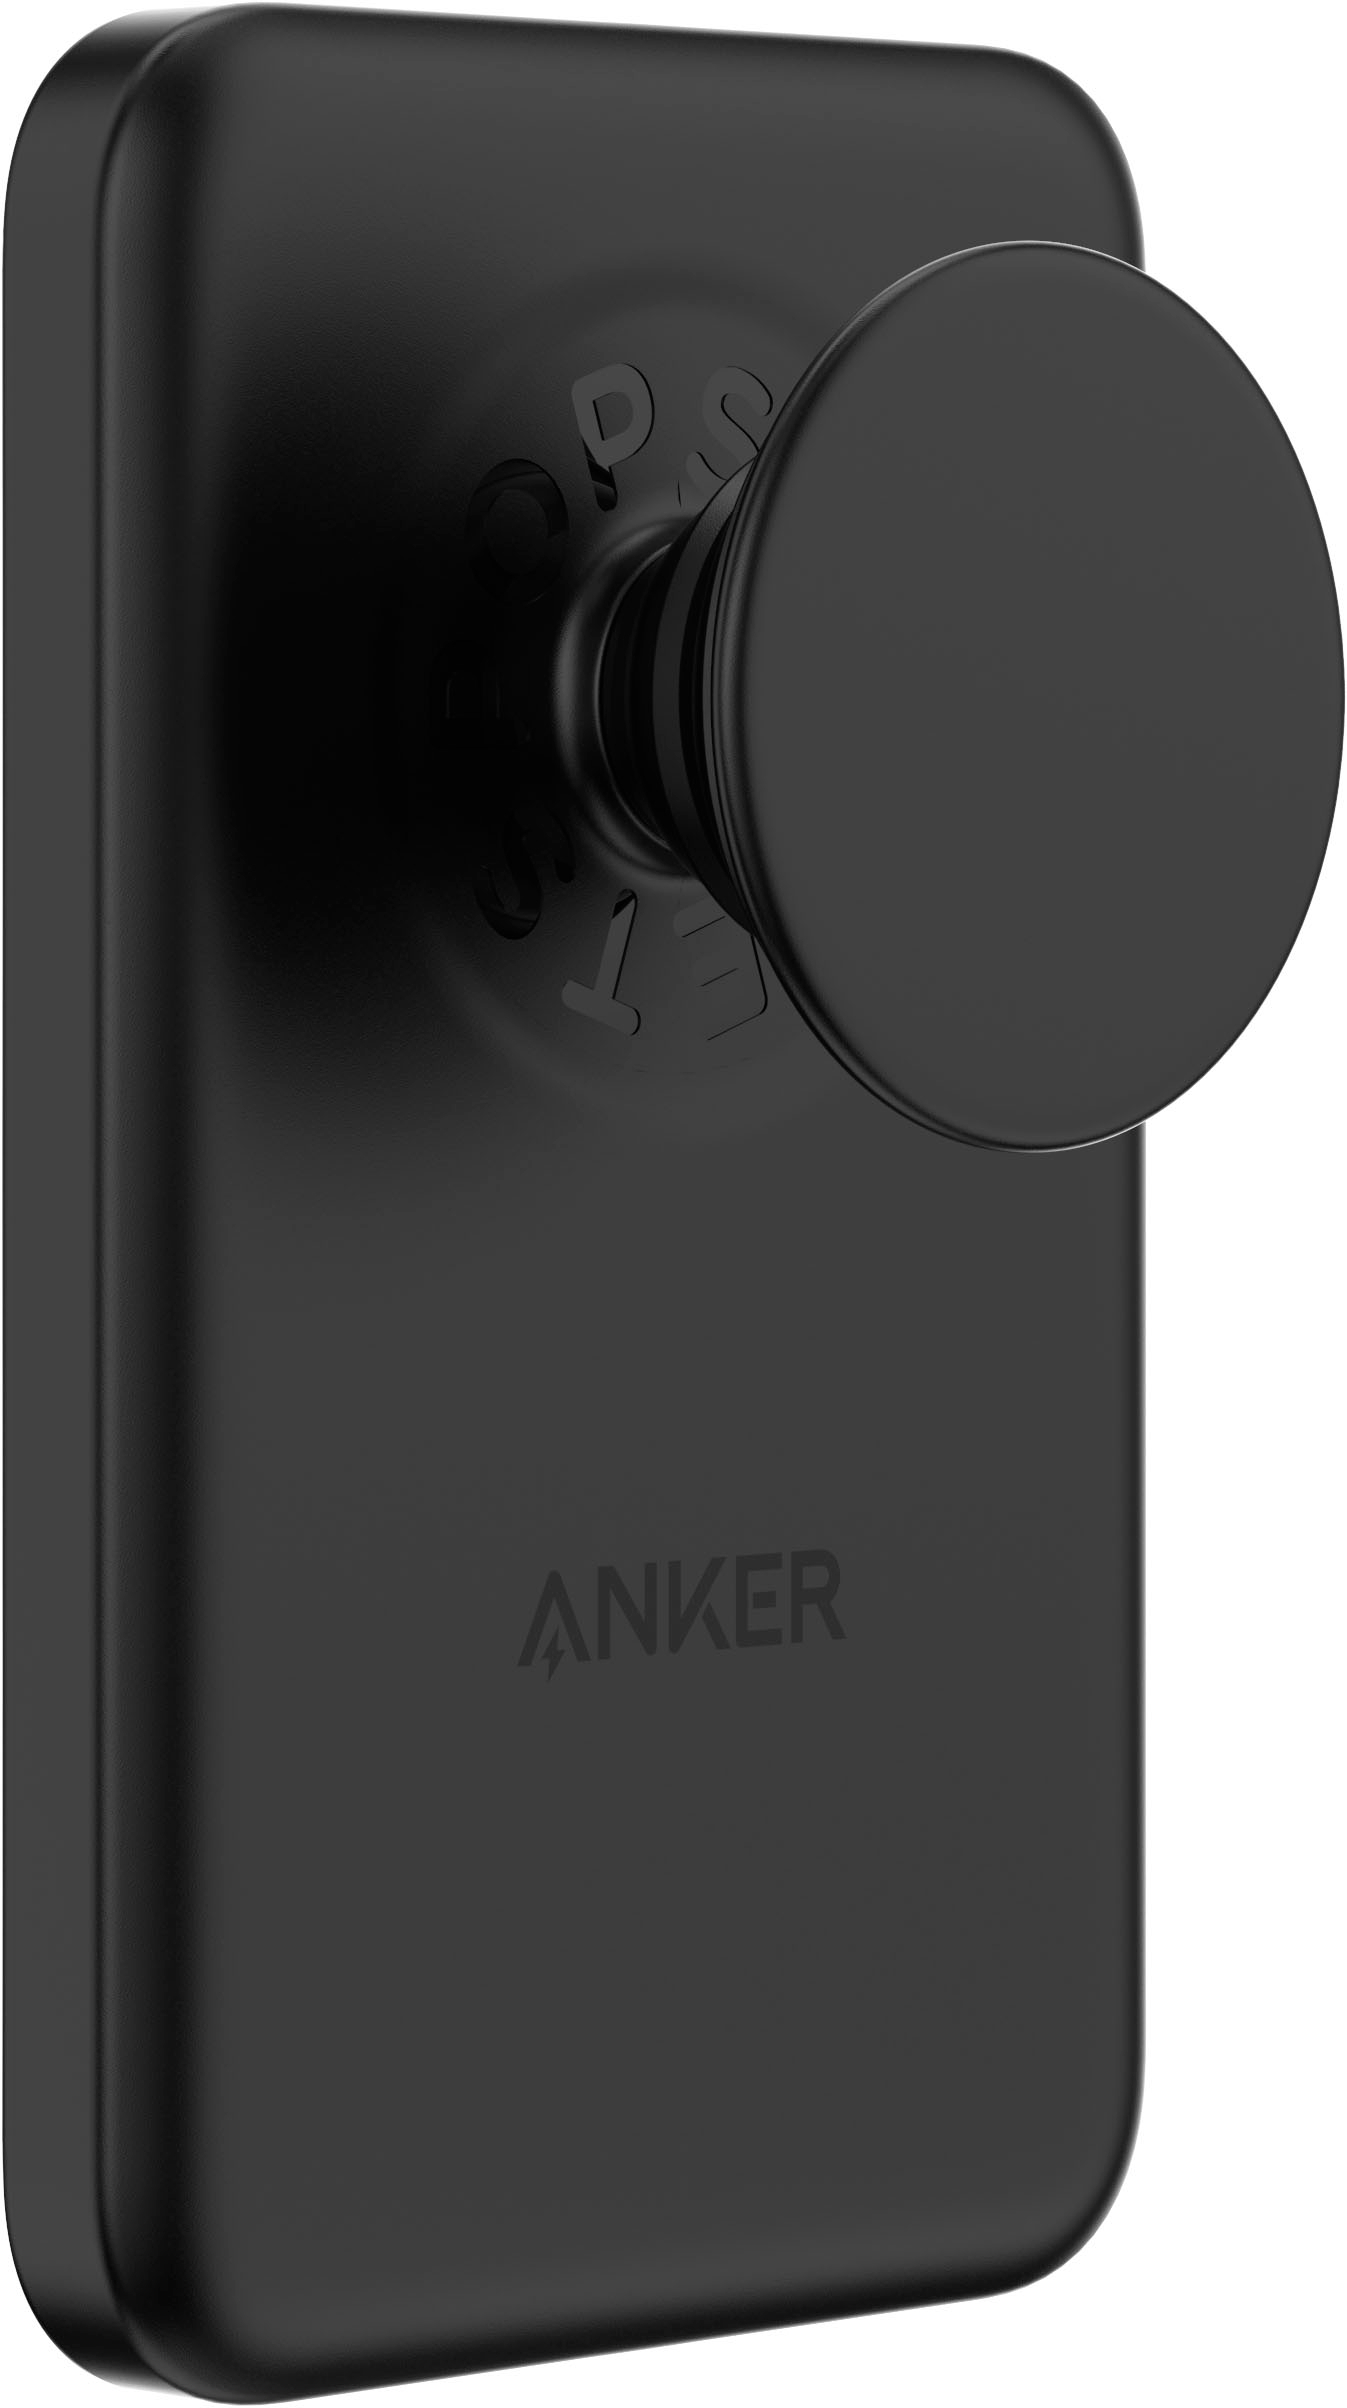 PopSockets x Anker MagGo 5000 mAh Portable Magnetic Battery Charger with  Grip for MagSafe Compatible Devices Black A1612H11 - Best Buy